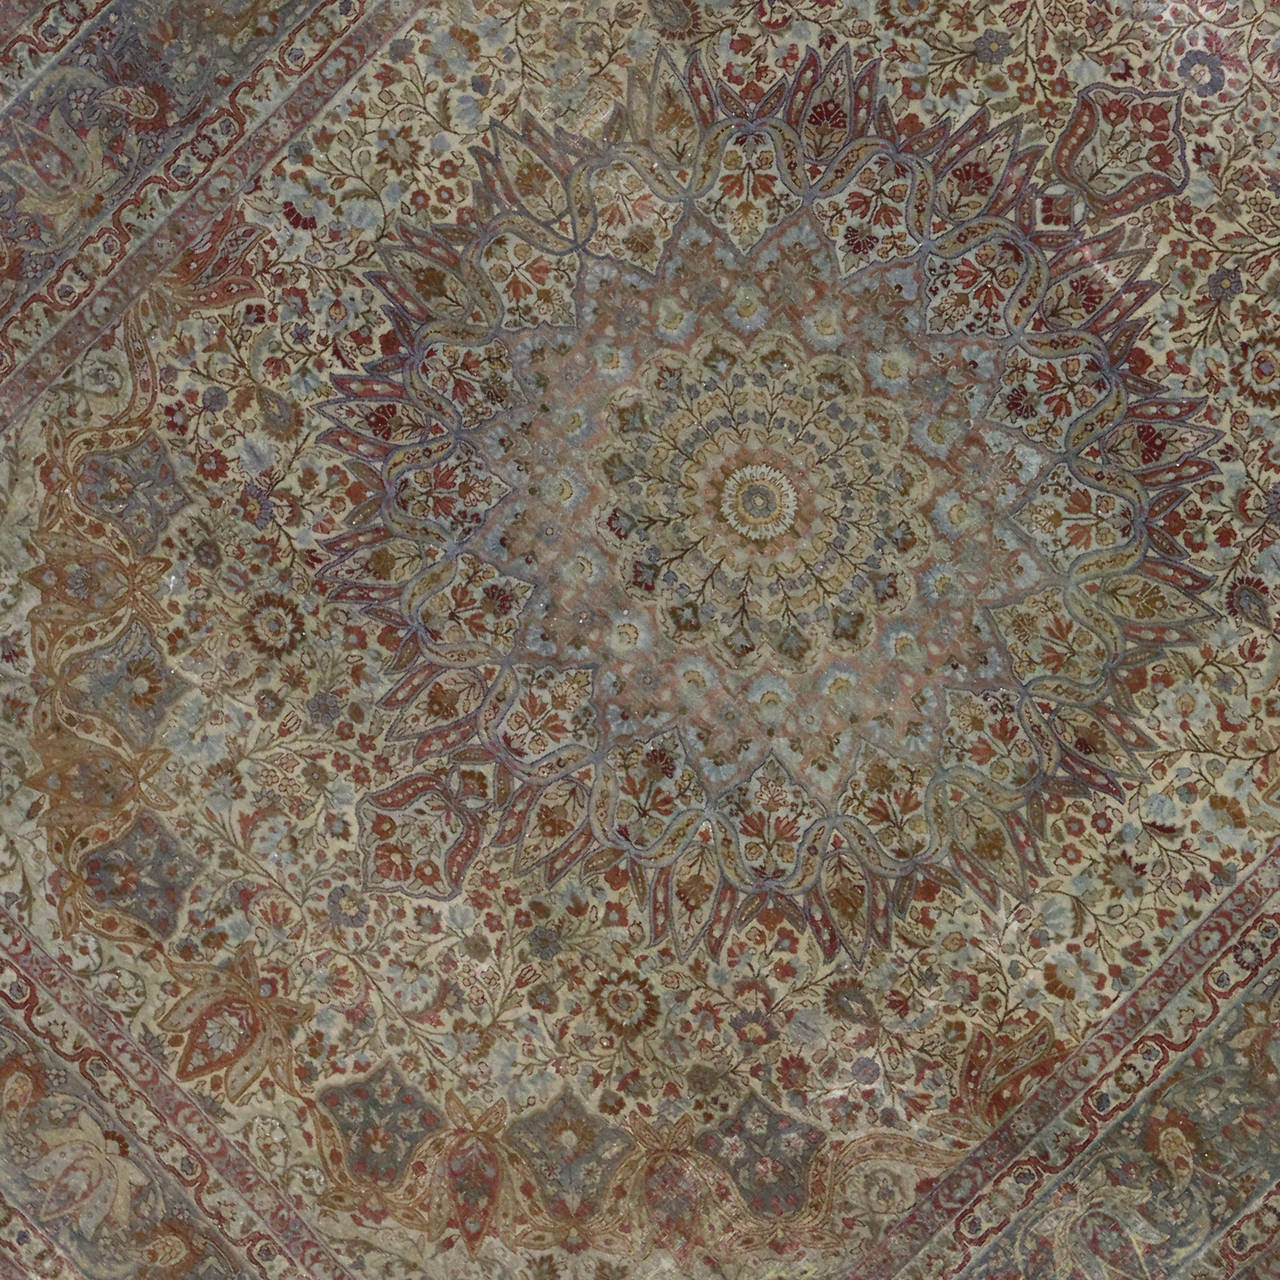 Hand-Knotted Distressed Antique Persian Kerman Area Rug